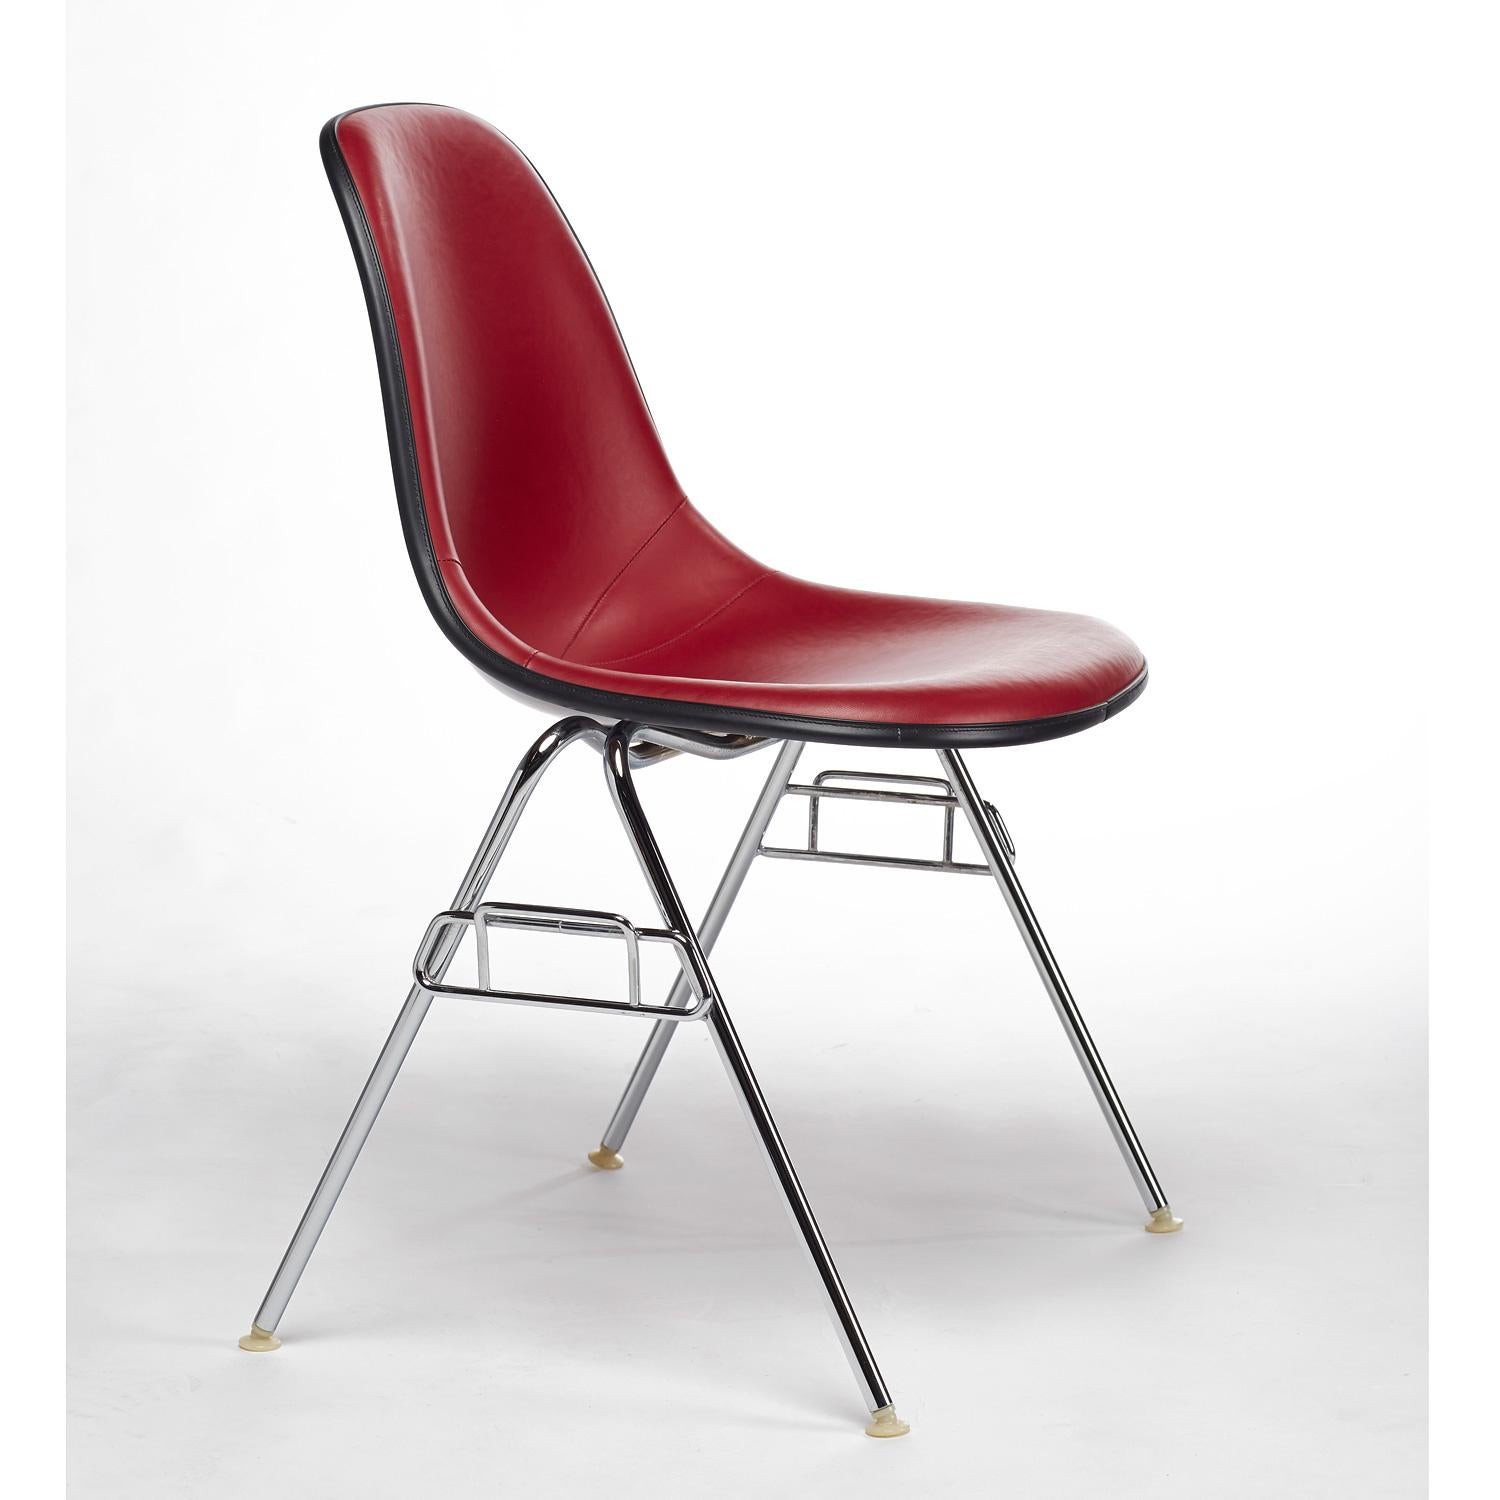 Late 20th Century Eames Red Padded Vinyl Molded Fiberglass Shell Chairs by Herman Miller, 1980s